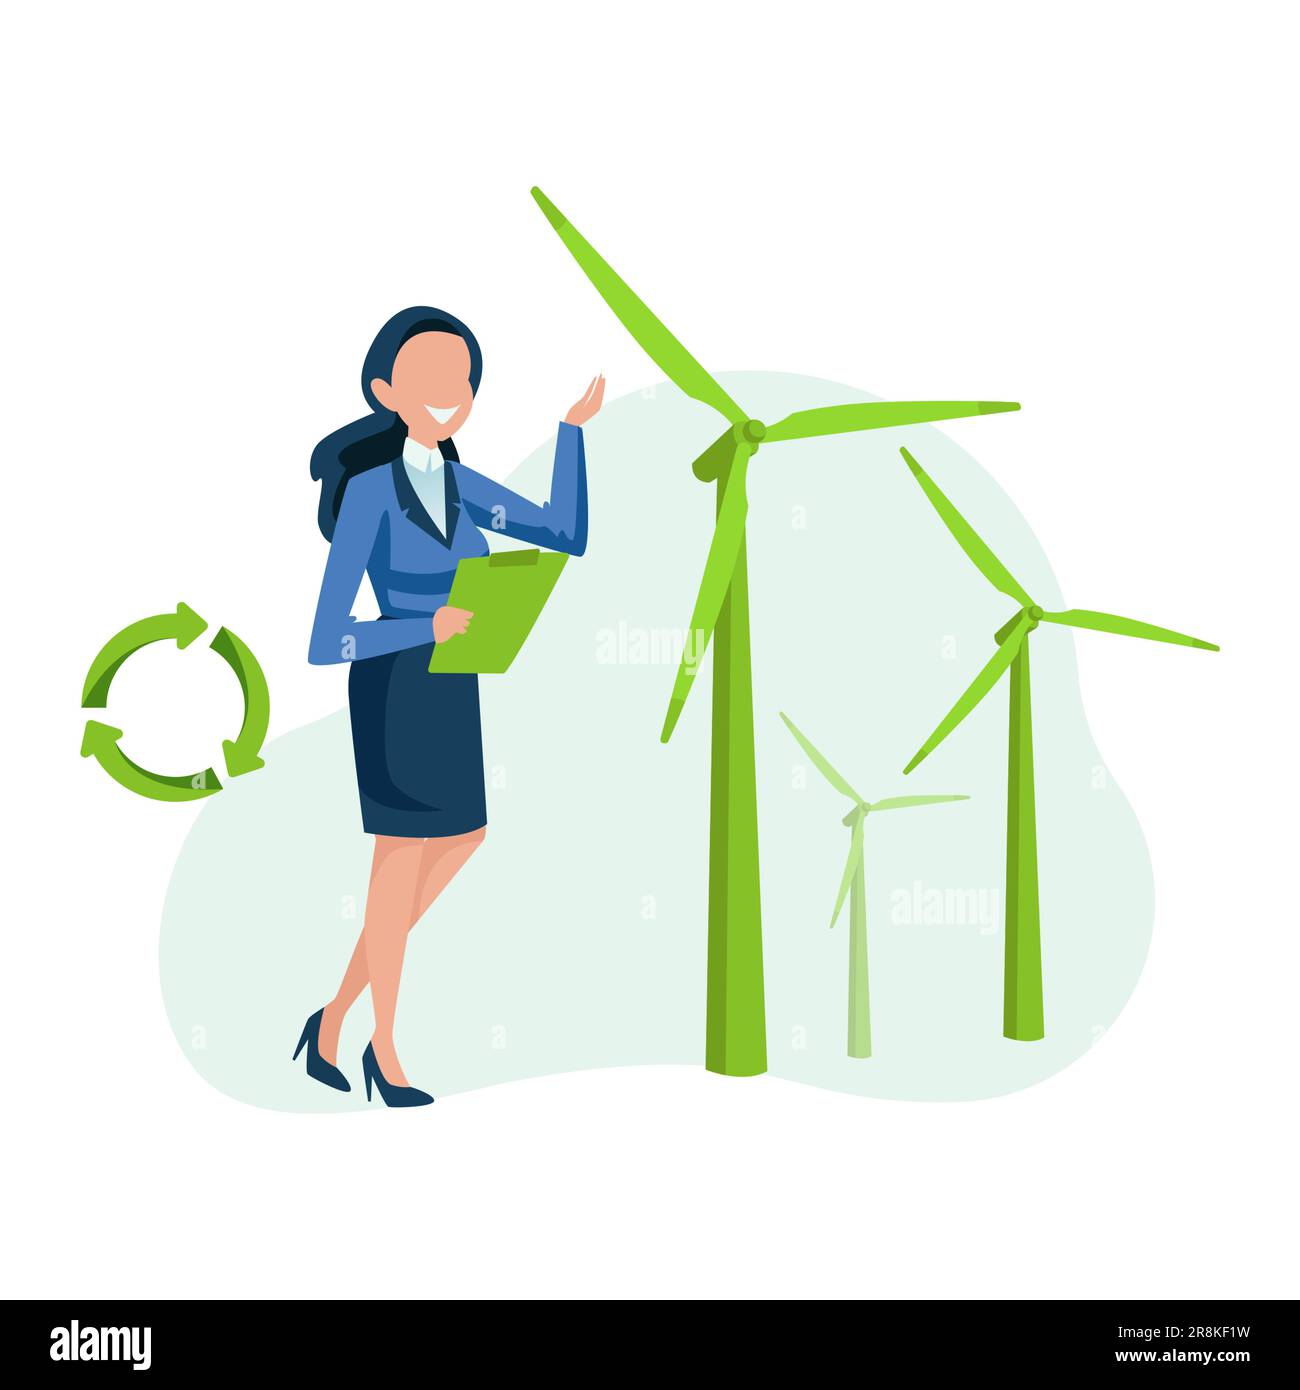 Vector of a business woman offering green energy solution wind mills Stock Vector